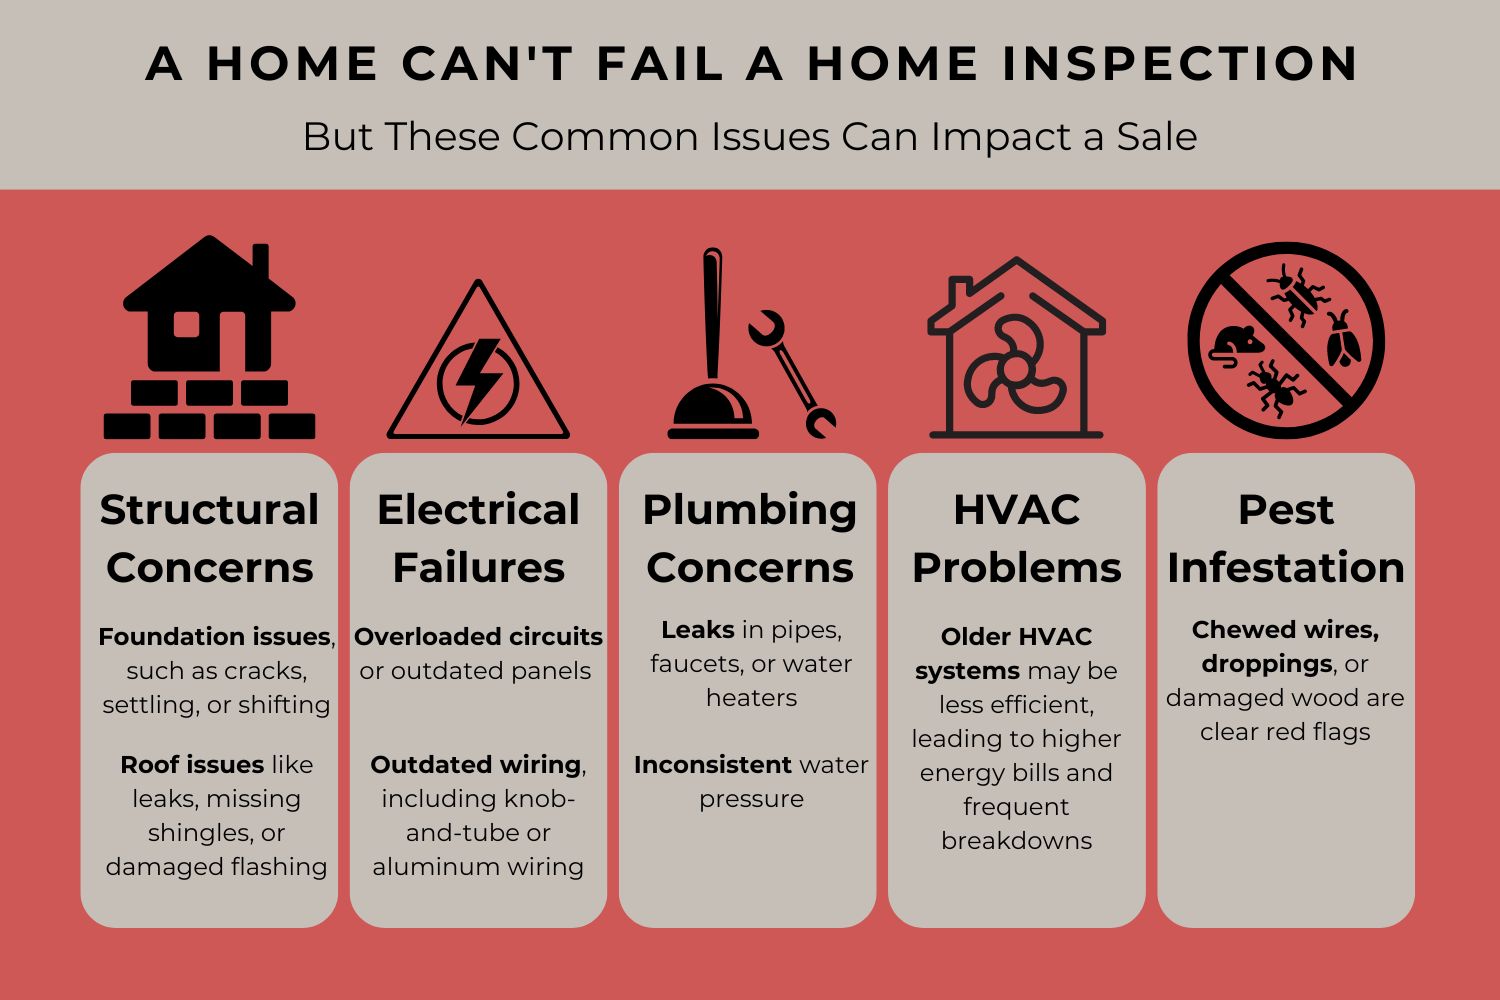 Issues that won't fail an inspection but will impact the sale of a home.